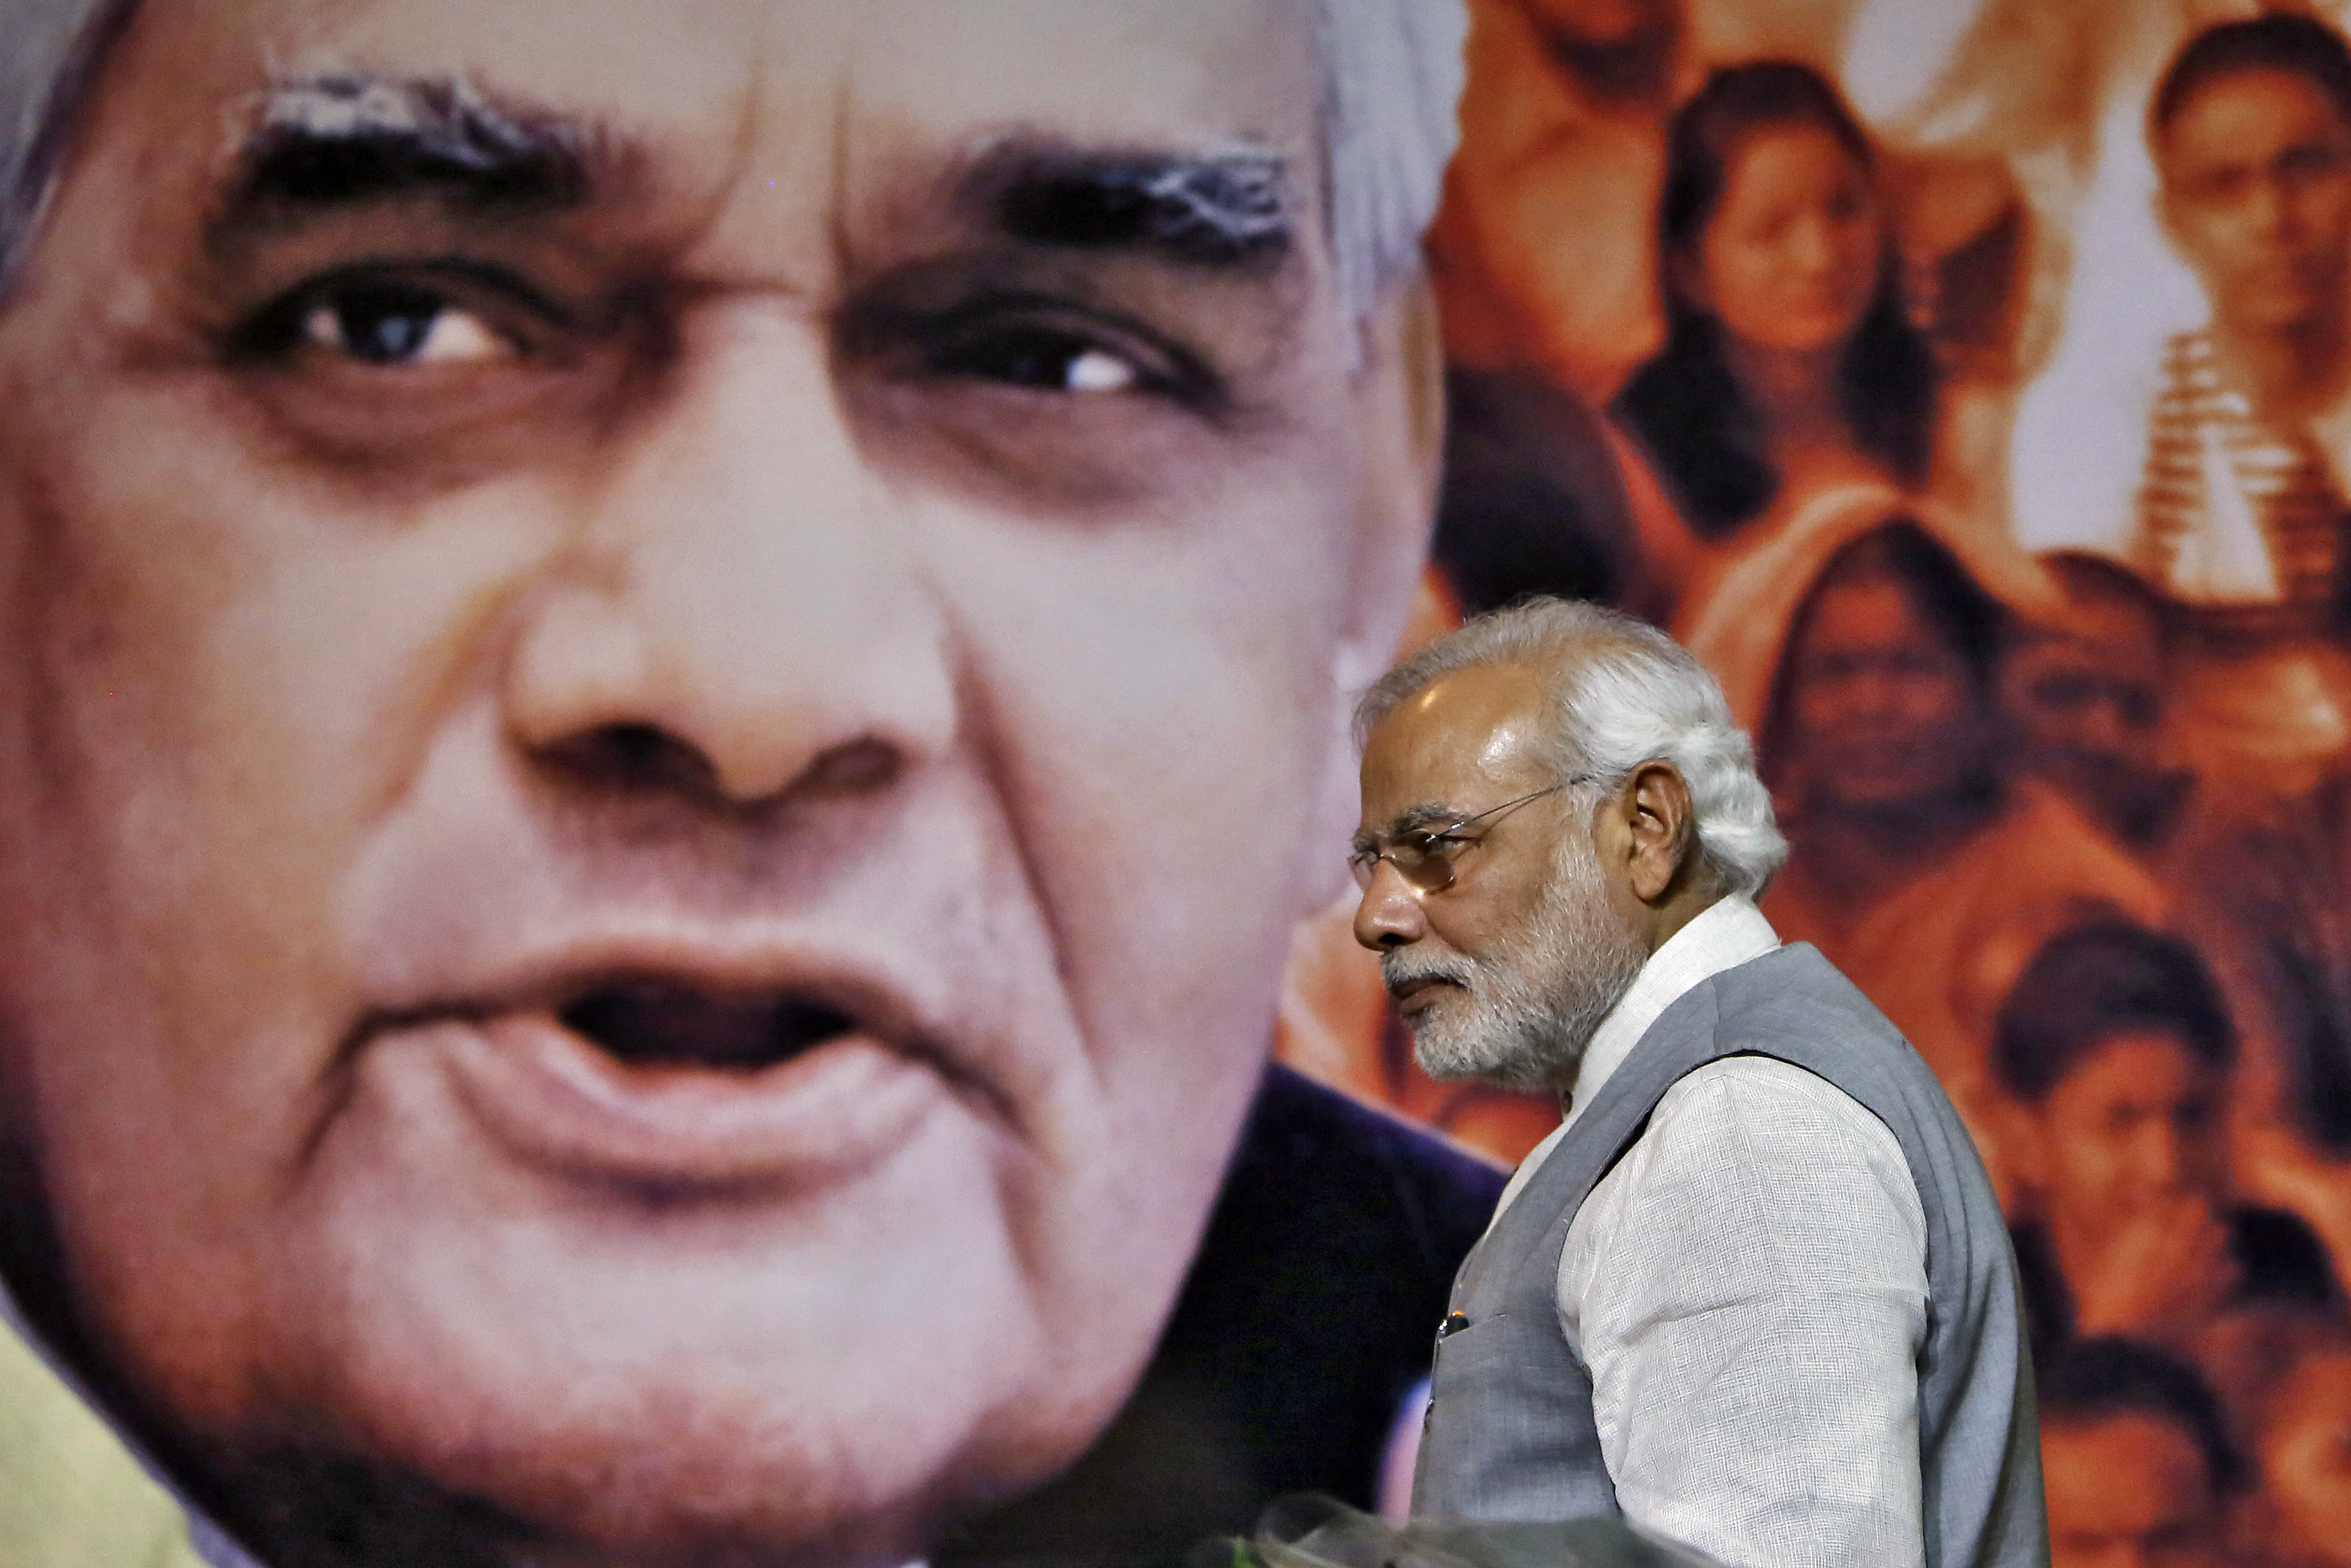 Indian PM Modi walks in front of a picture of former Indian PM Vajpayee after a news conference in New Delhi